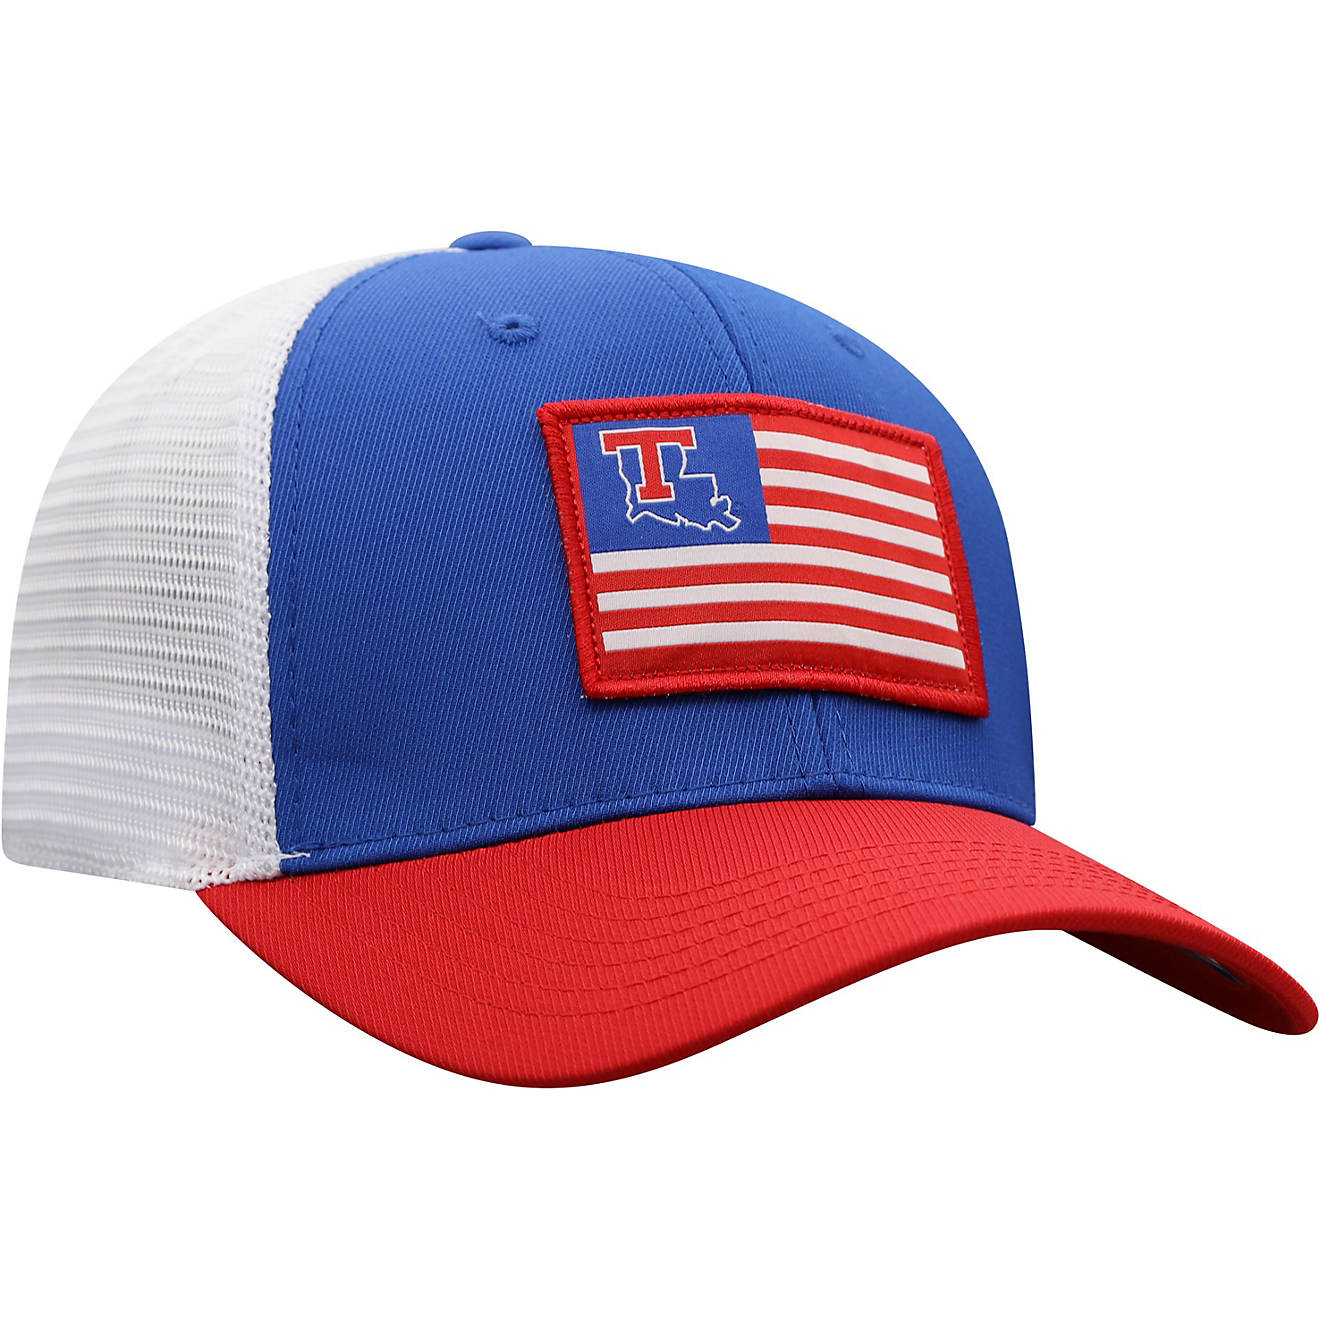 Top of the World Men's Louisiana Tech University Pedigree One Fit Cap                                                            - view number 1